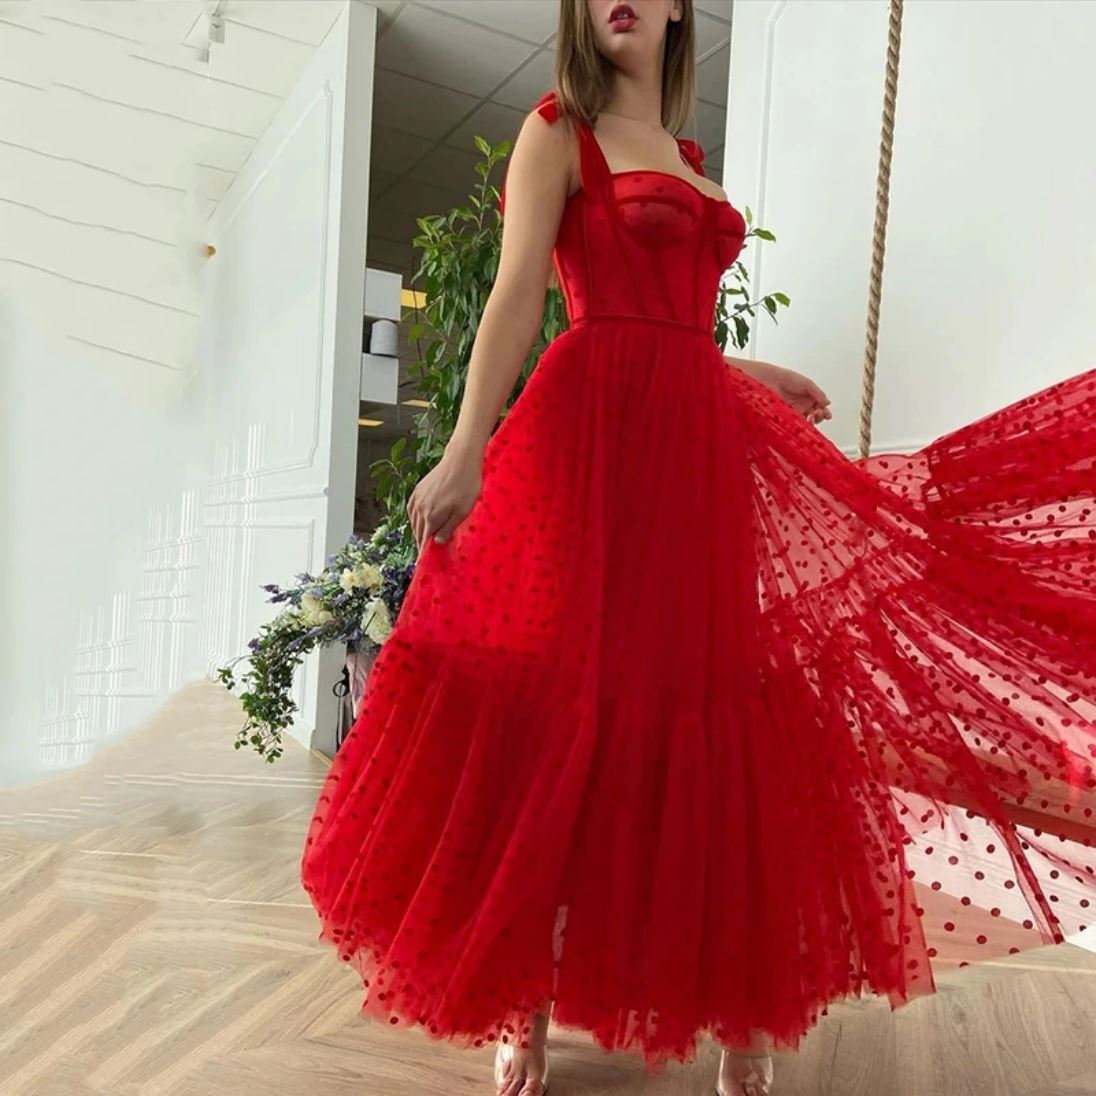 Red Polka Dots Tulle A Line Prom Dress Off Shoulder Prom Dresses BlissGown 